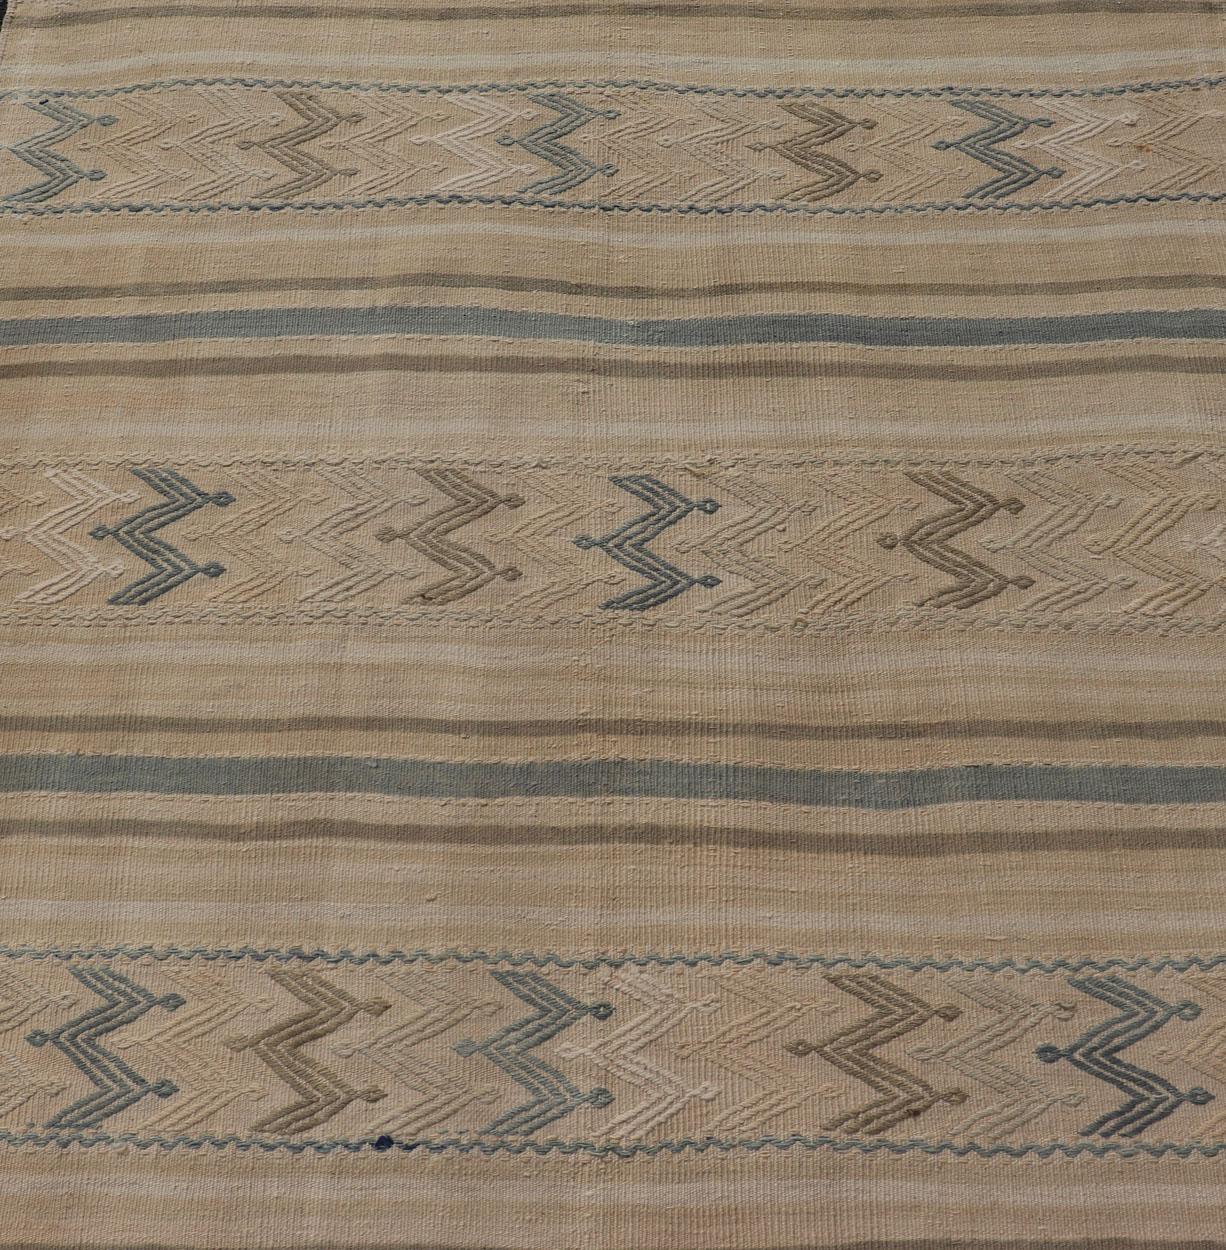 Wool Vintage Turkish Flat-Weave with Embroideries in Earth Tones and Blue For Sale